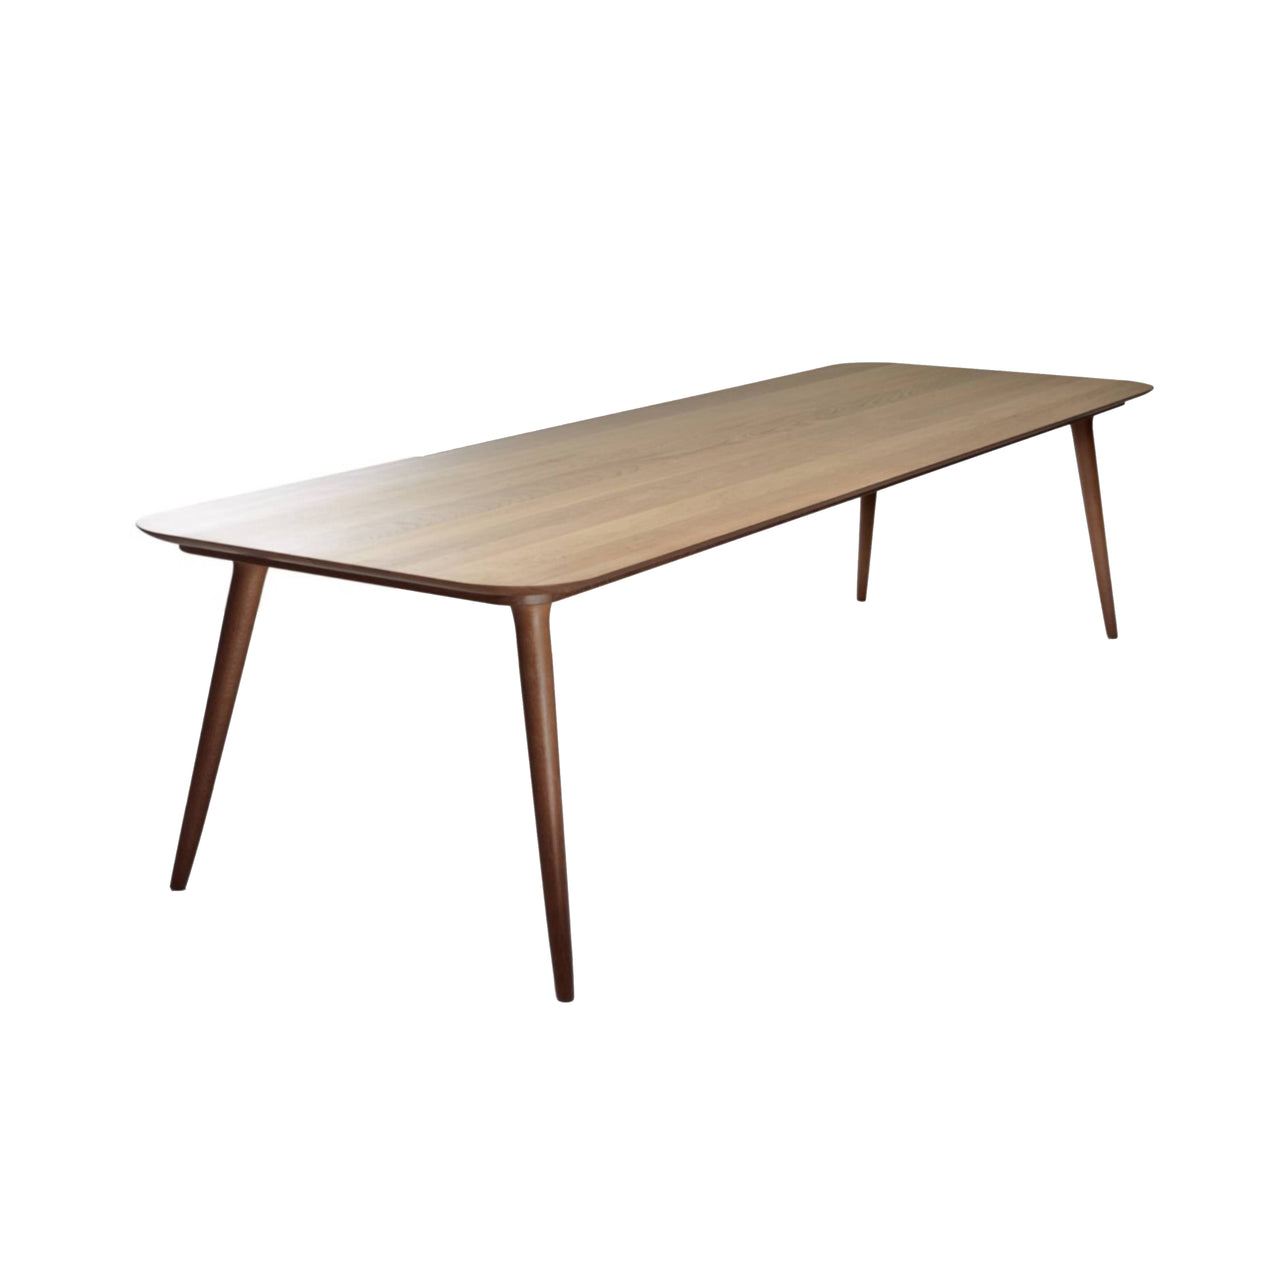 Zio Dining Table: Small - 74.8